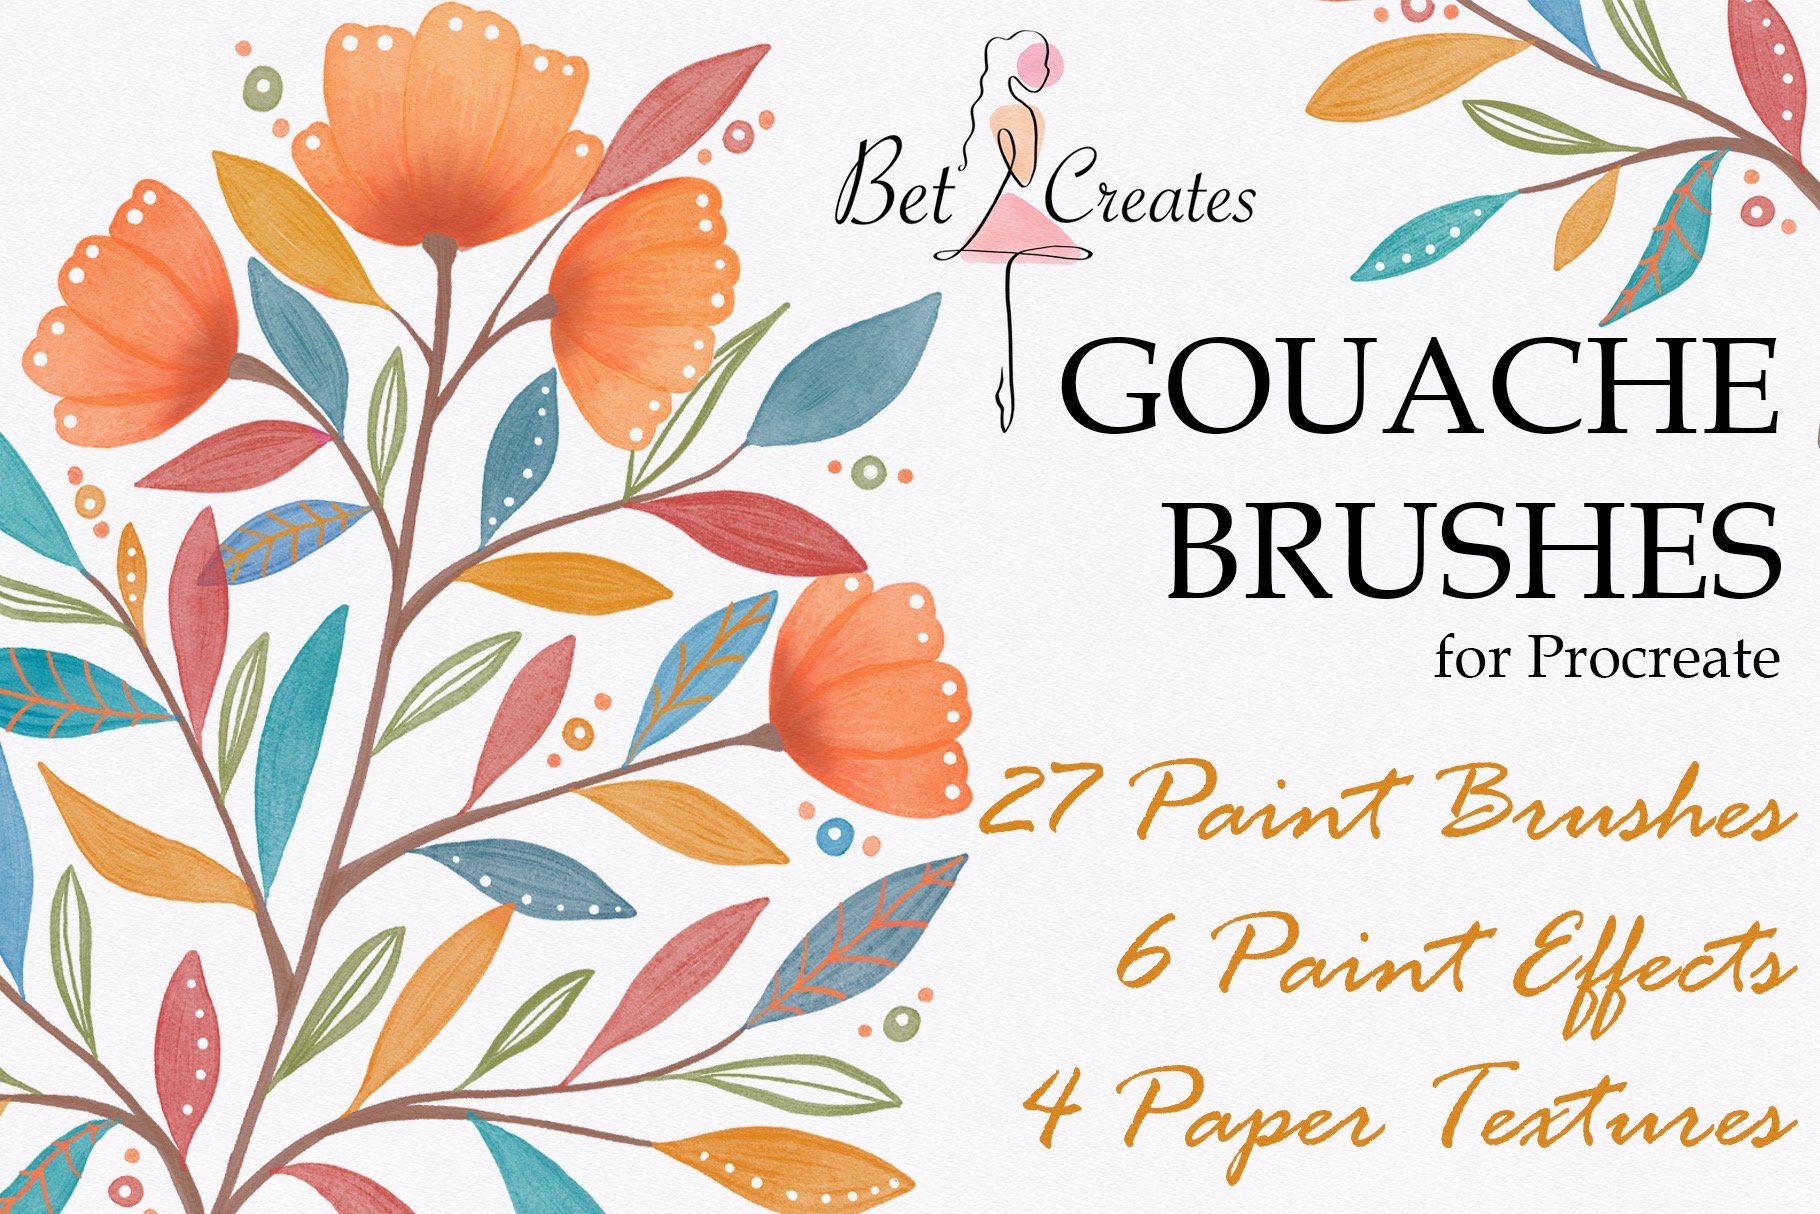 What is Gouache? - Answering your GOUACHE FAQs - The Fearless Brush